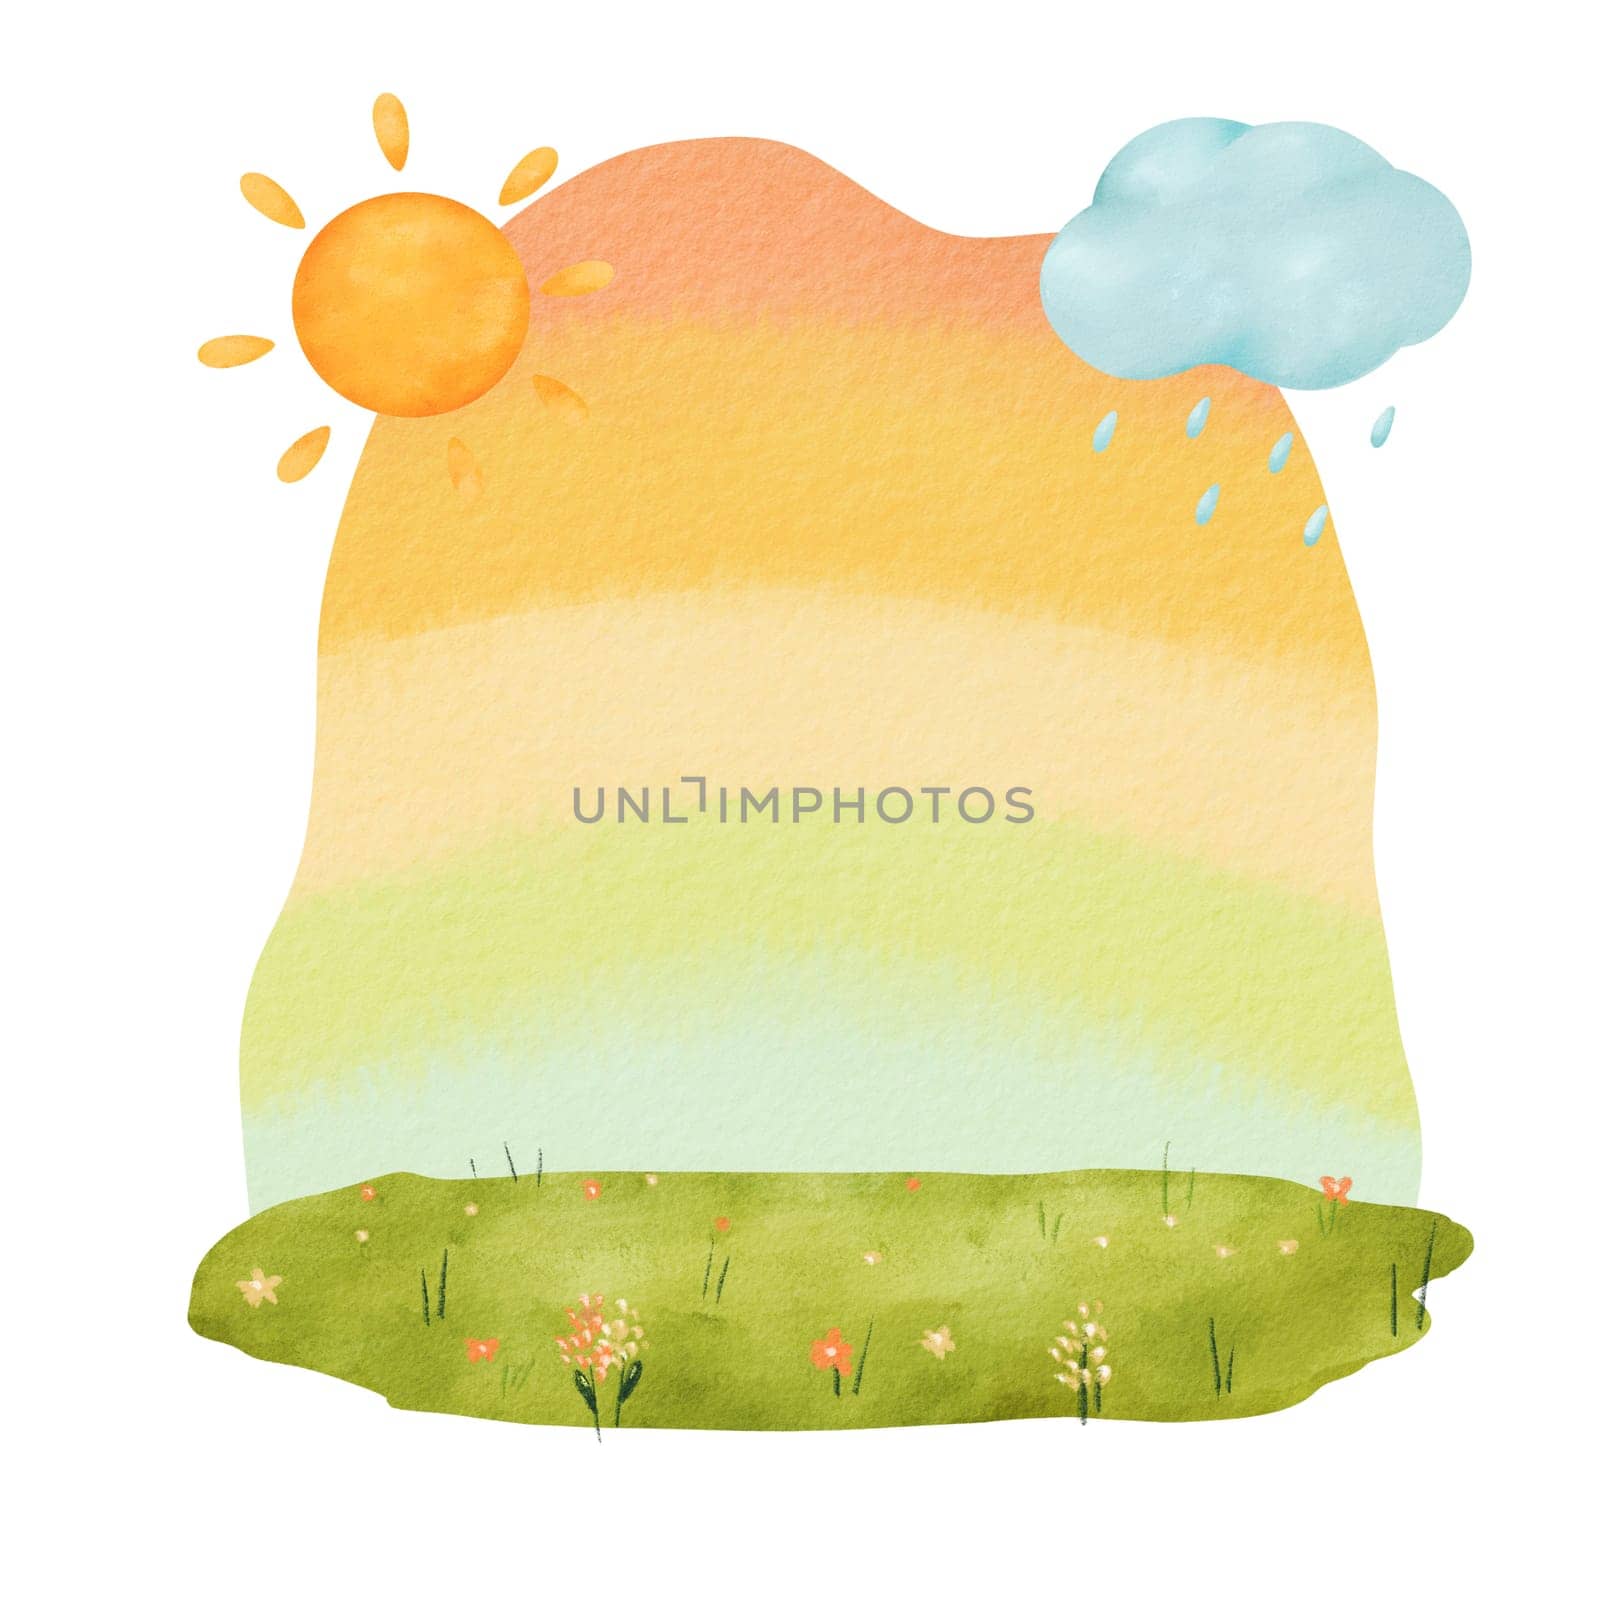 watercolor background for children's illustrations. composition is a green meadow with flowers, a soft rainbow backdrop, and the playful elements of sun and rain. for books, posters, and designs by Art_Mari_Ka